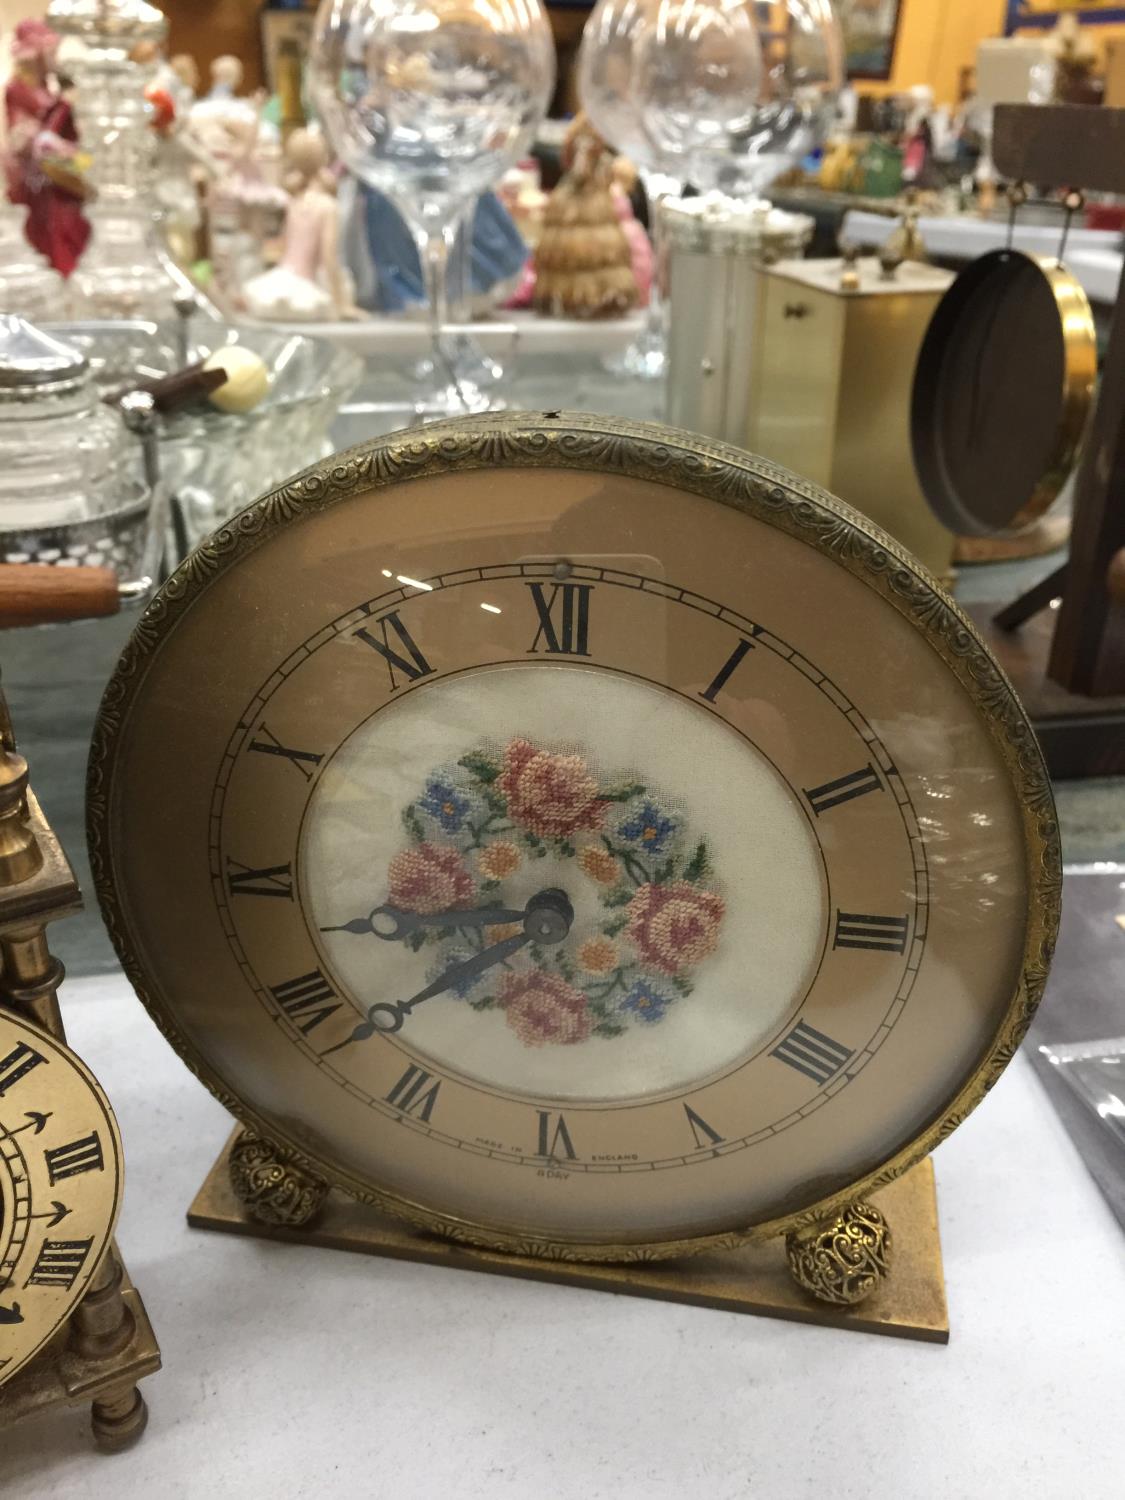 THREE VINTAGE CLOCKS TO INCLUDE A BRASS LANTERN CLOCK, A PETIT POINT MANTLE CLOCK AND ALARM CLOCK - Image 5 of 5